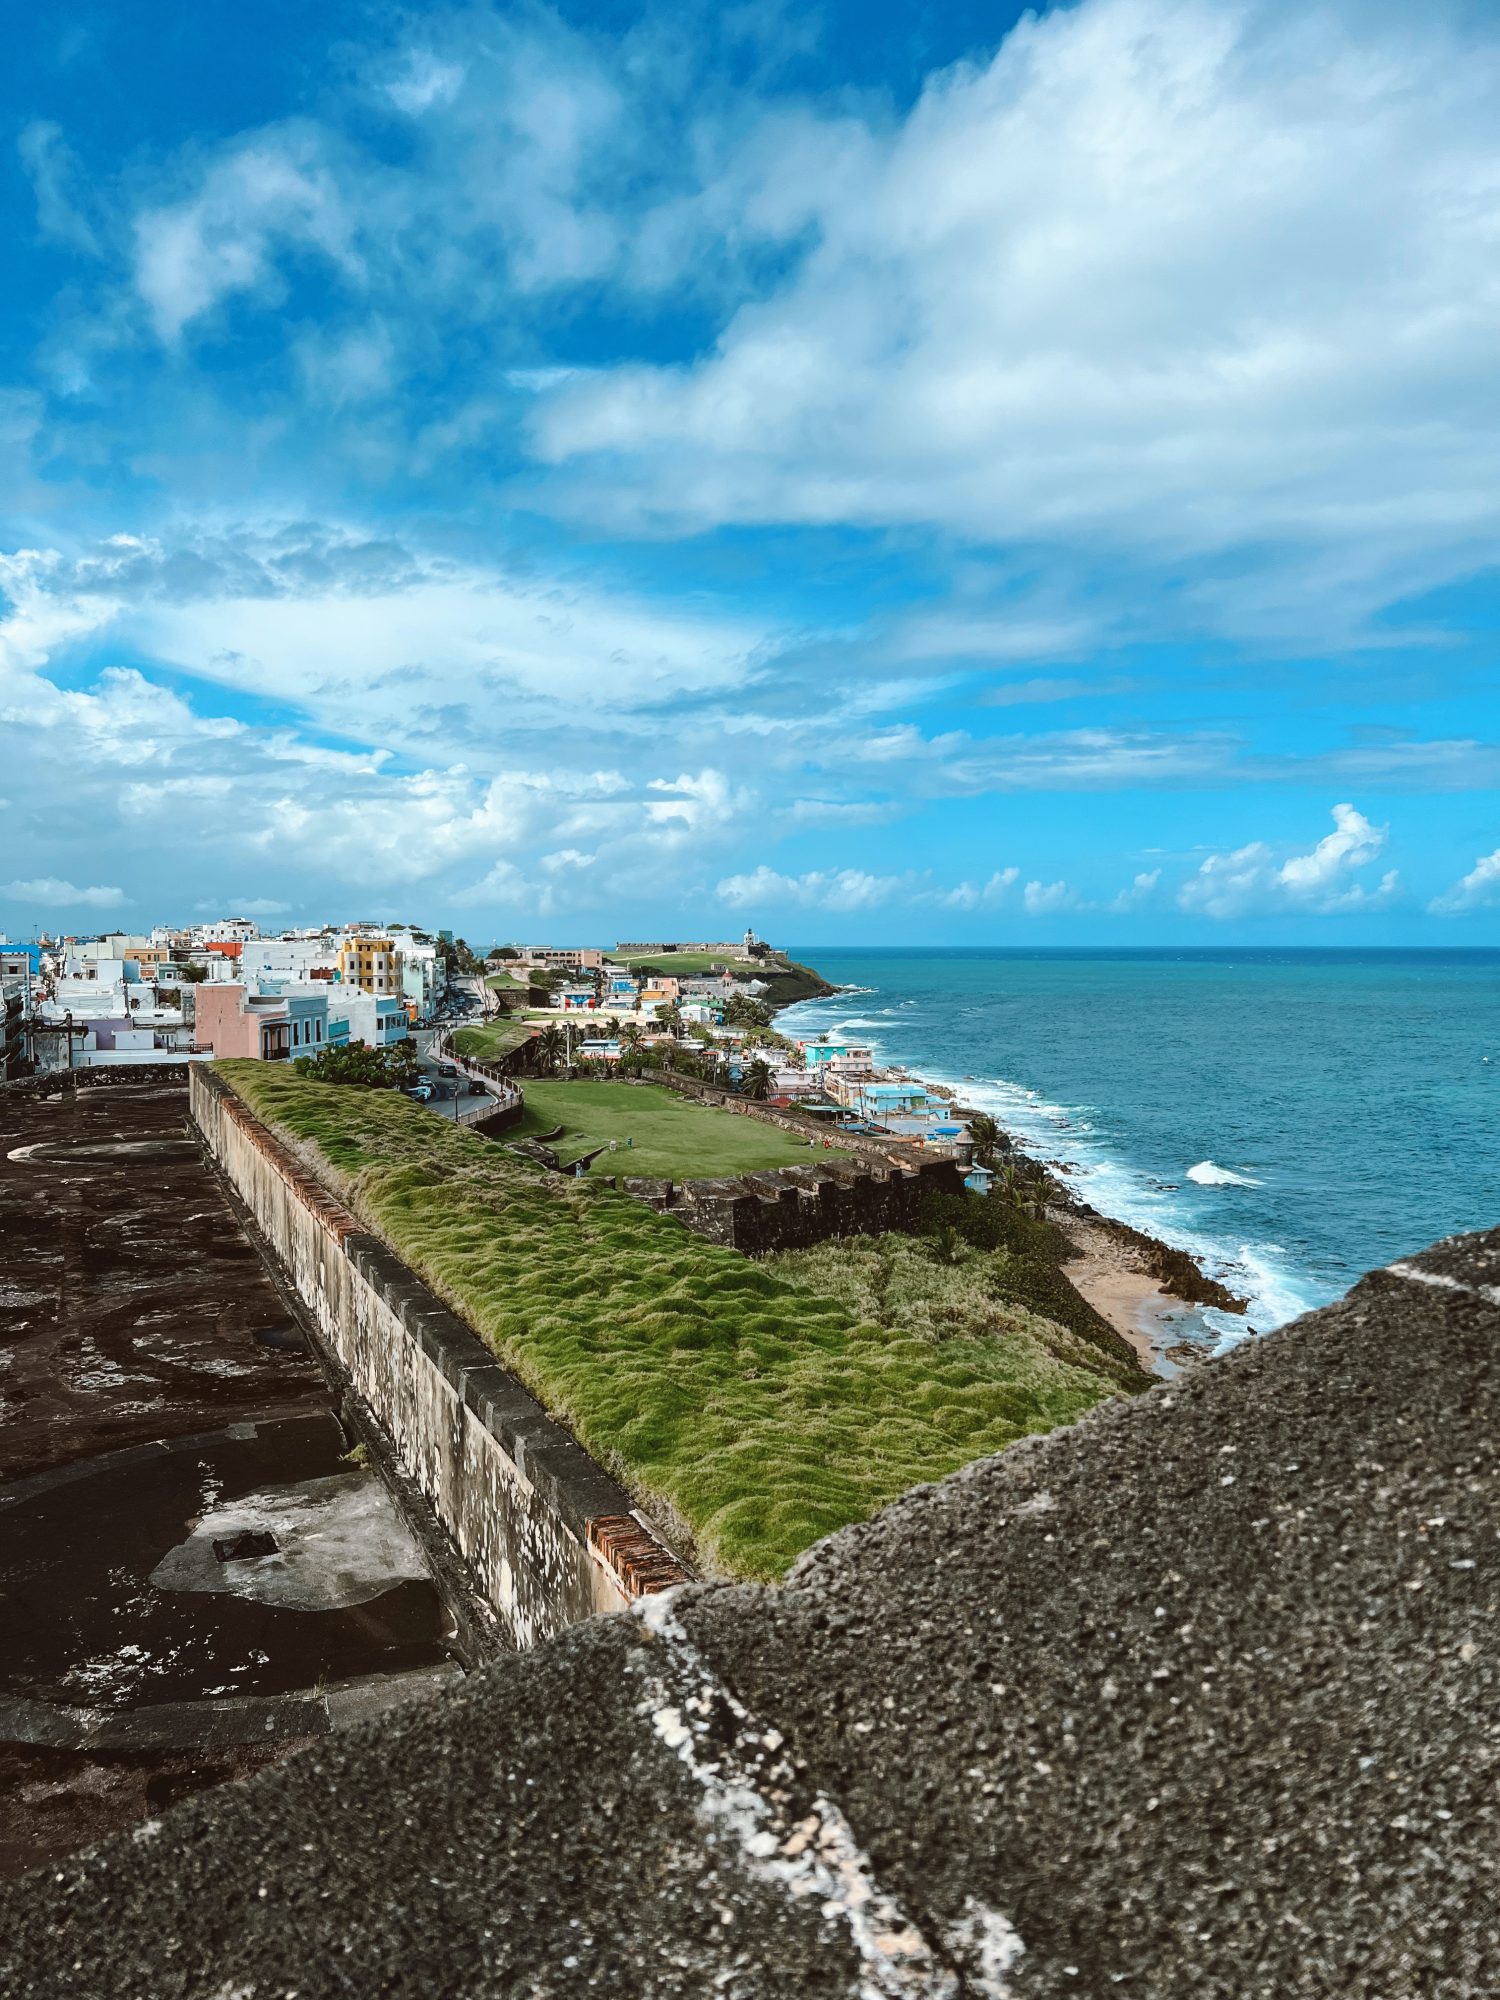 view from the top of a castle overlooking San Juan's coastline and cityscape.